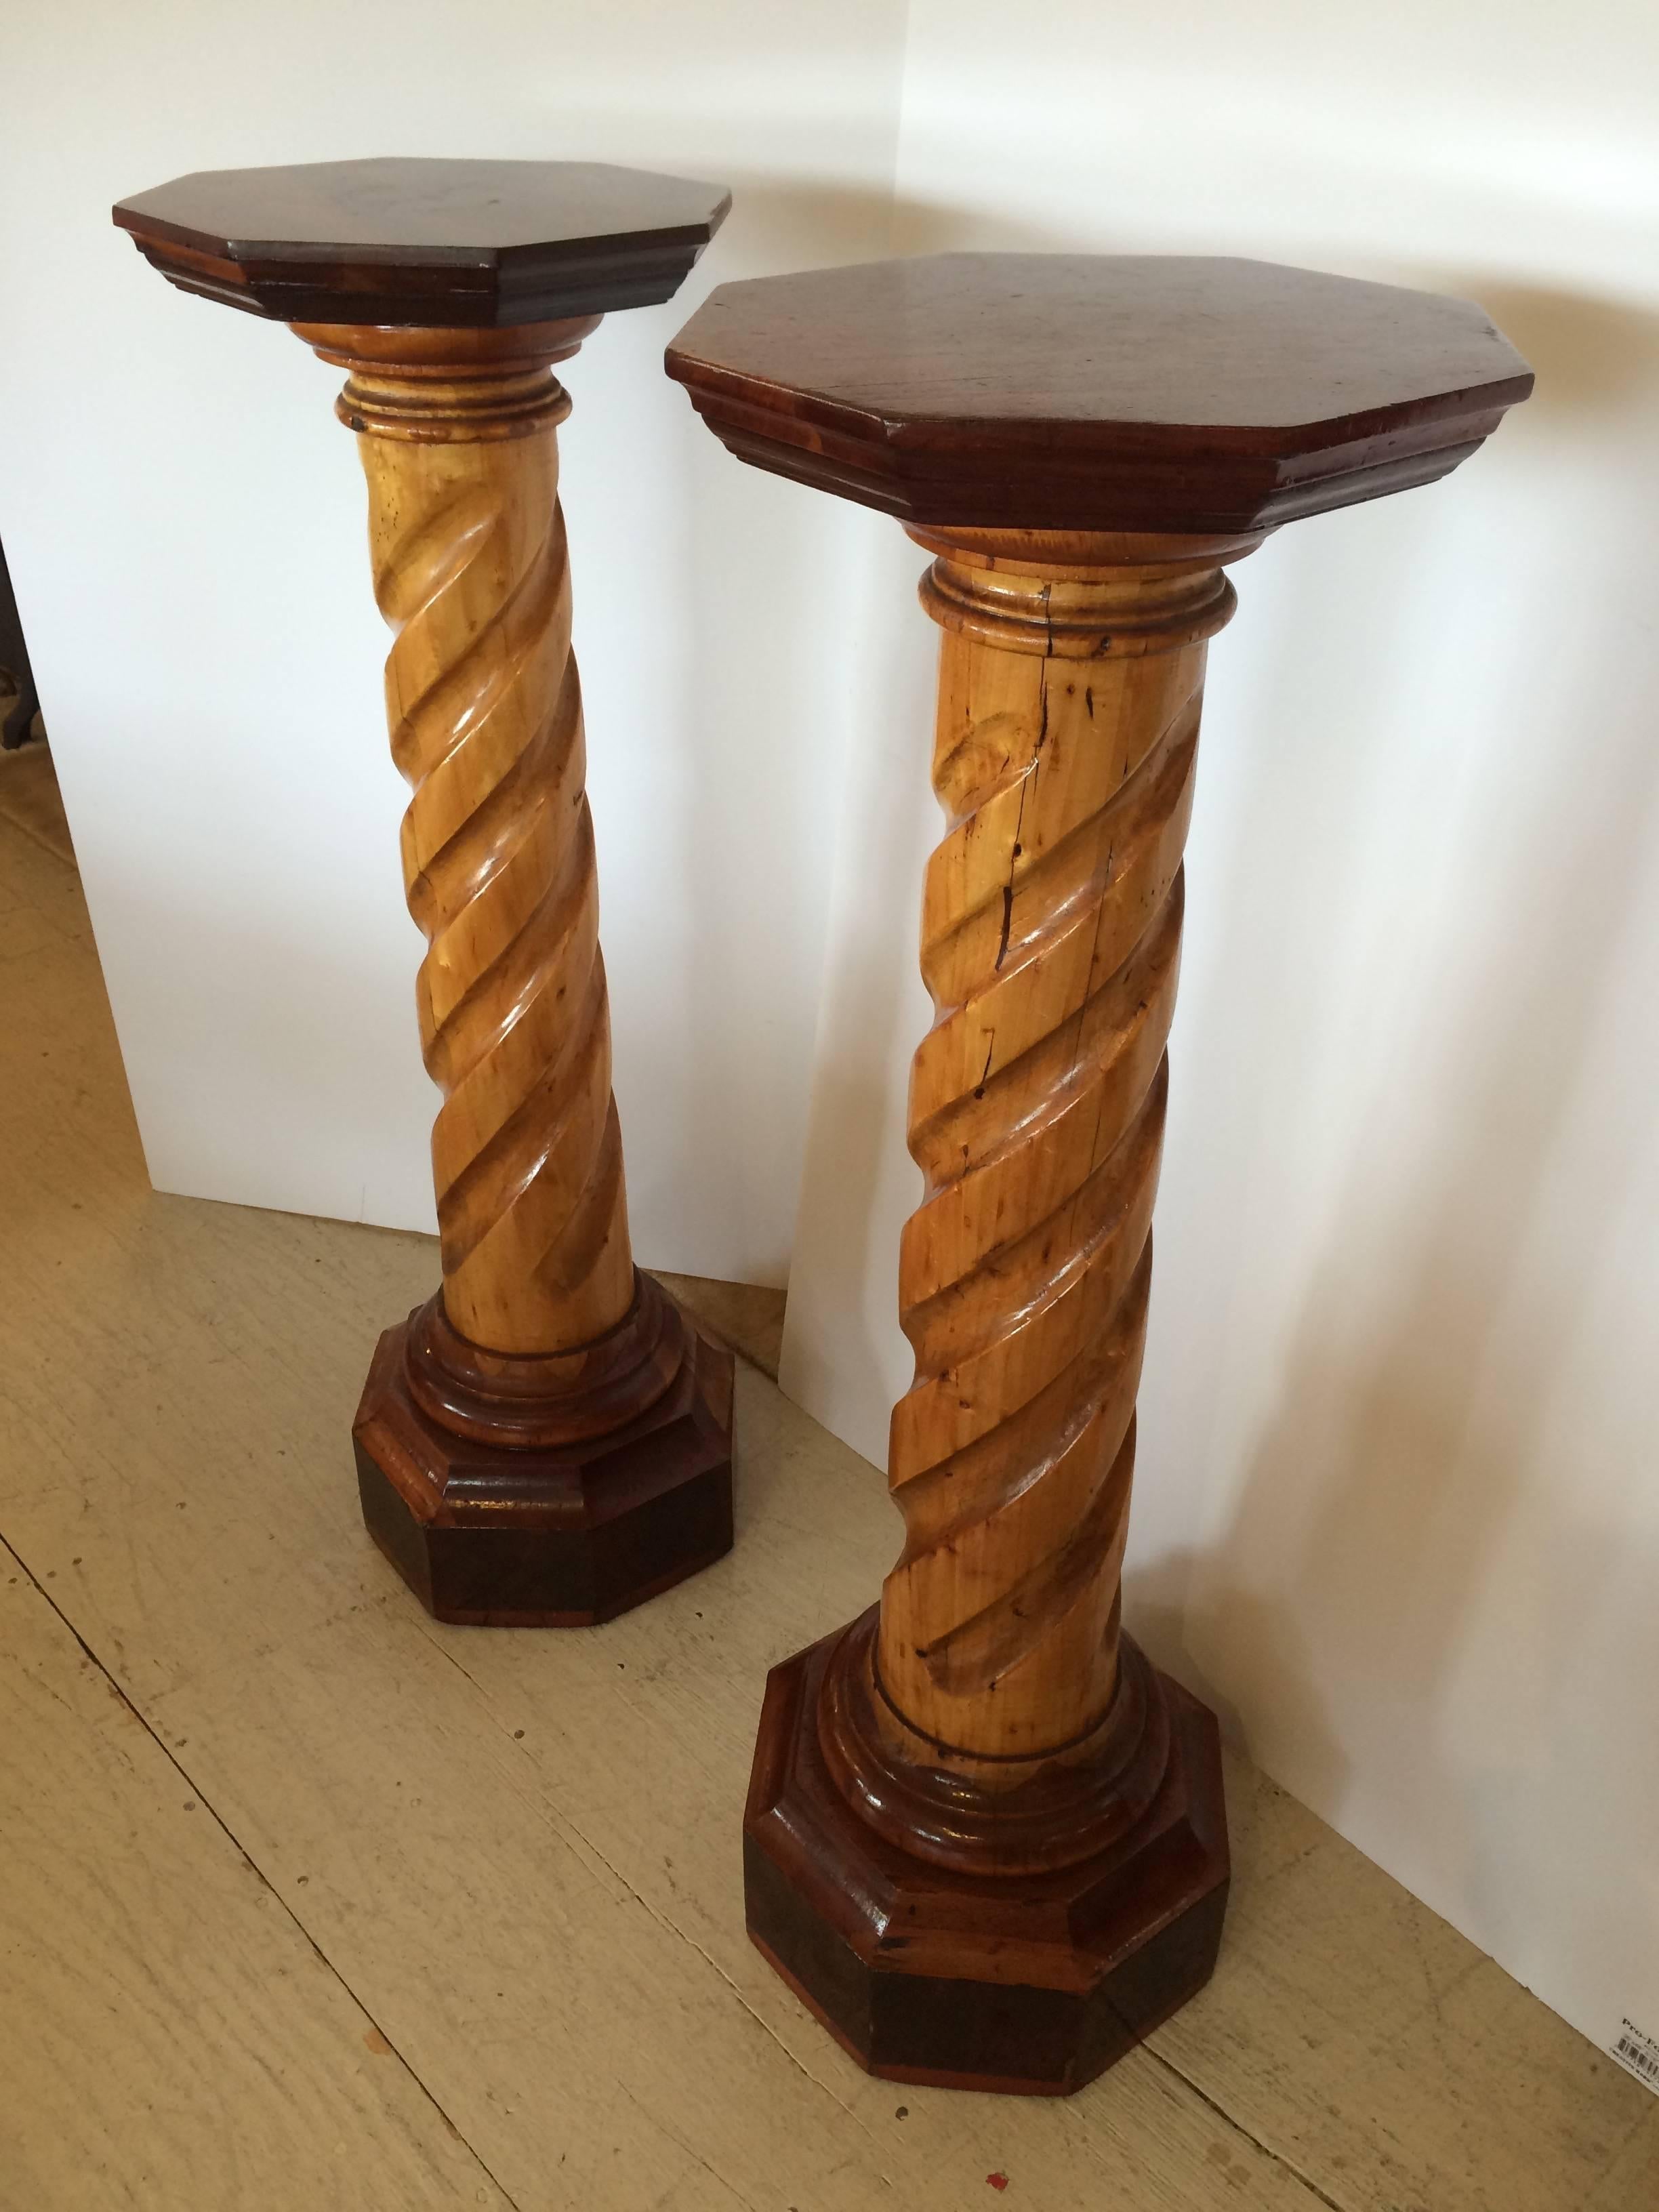 Stunning pair of carved wood pedestals having spiral carved design on the honey maple colored columns and a richer brown mahogany octagonal shaped top and bottom.

GG.